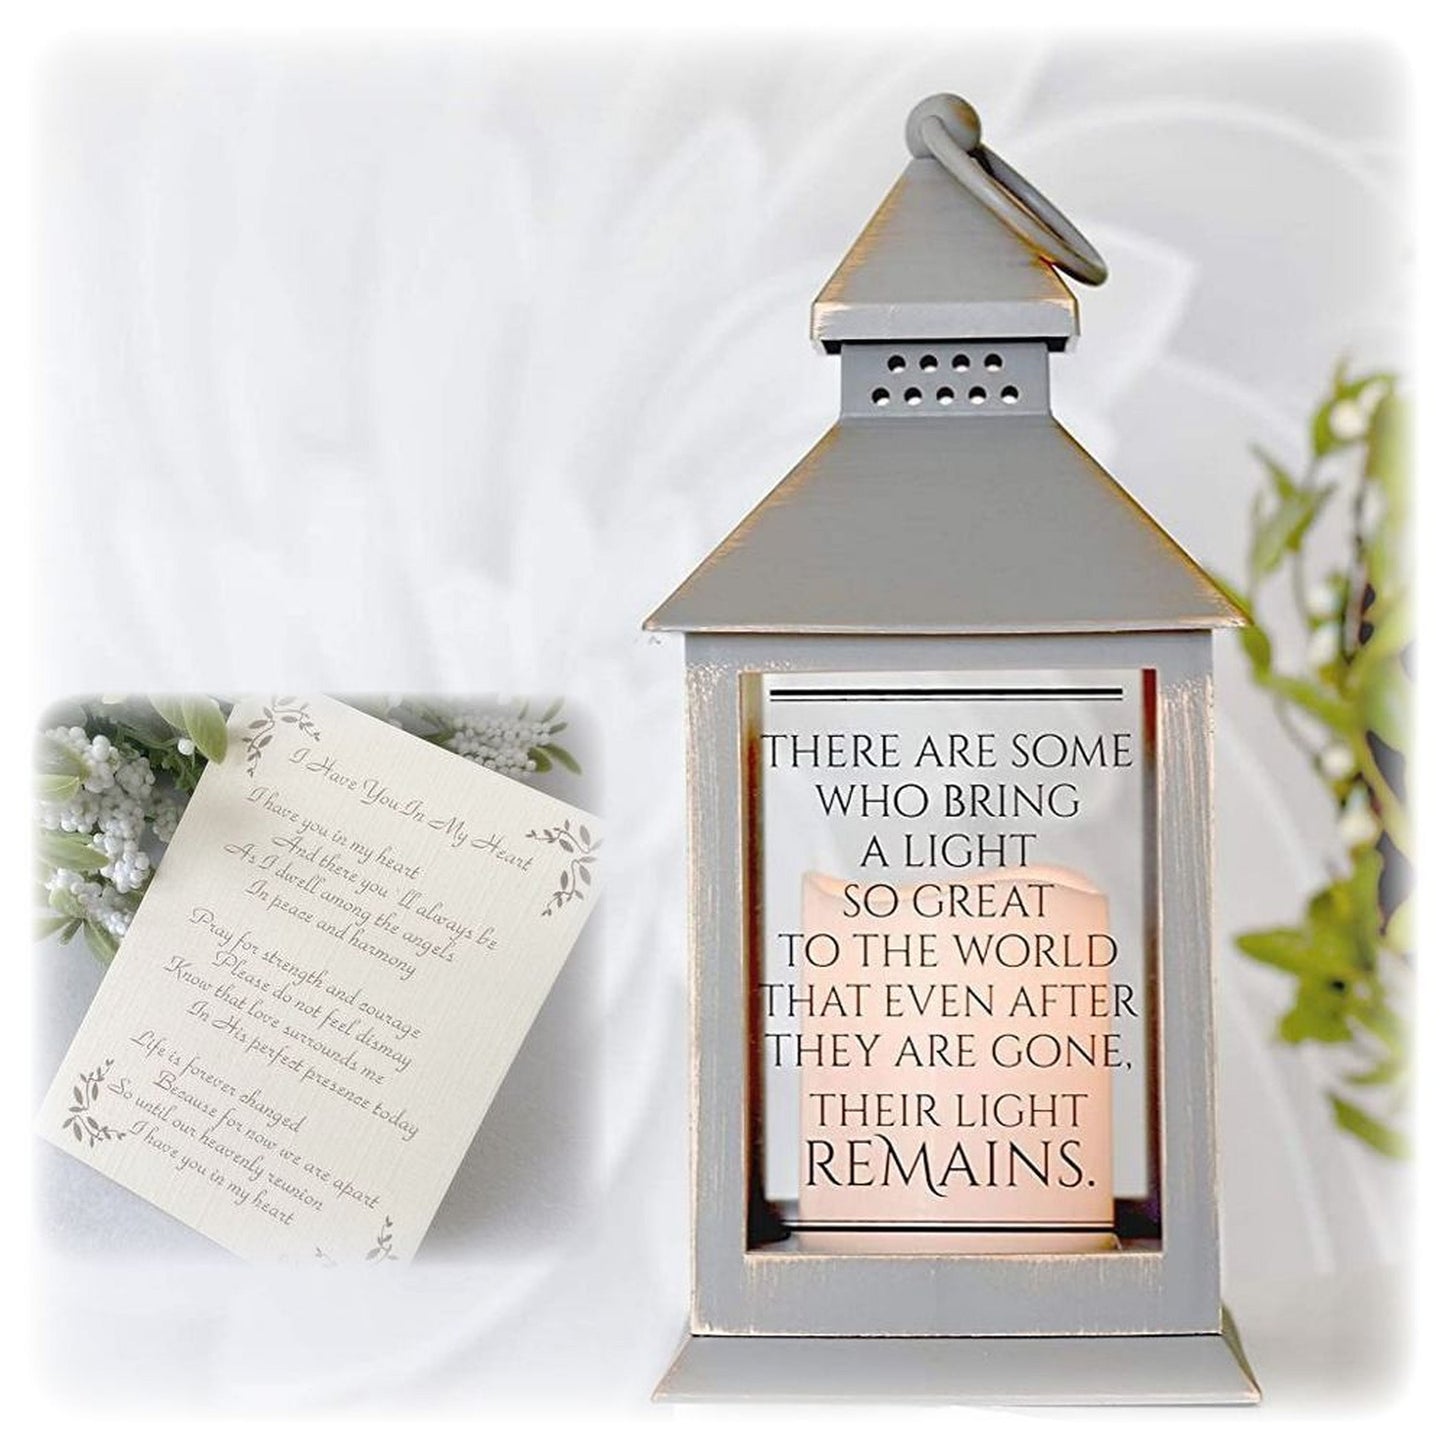 Their Light Remains Lantern Sympathy Gift with Automatic LED Candle